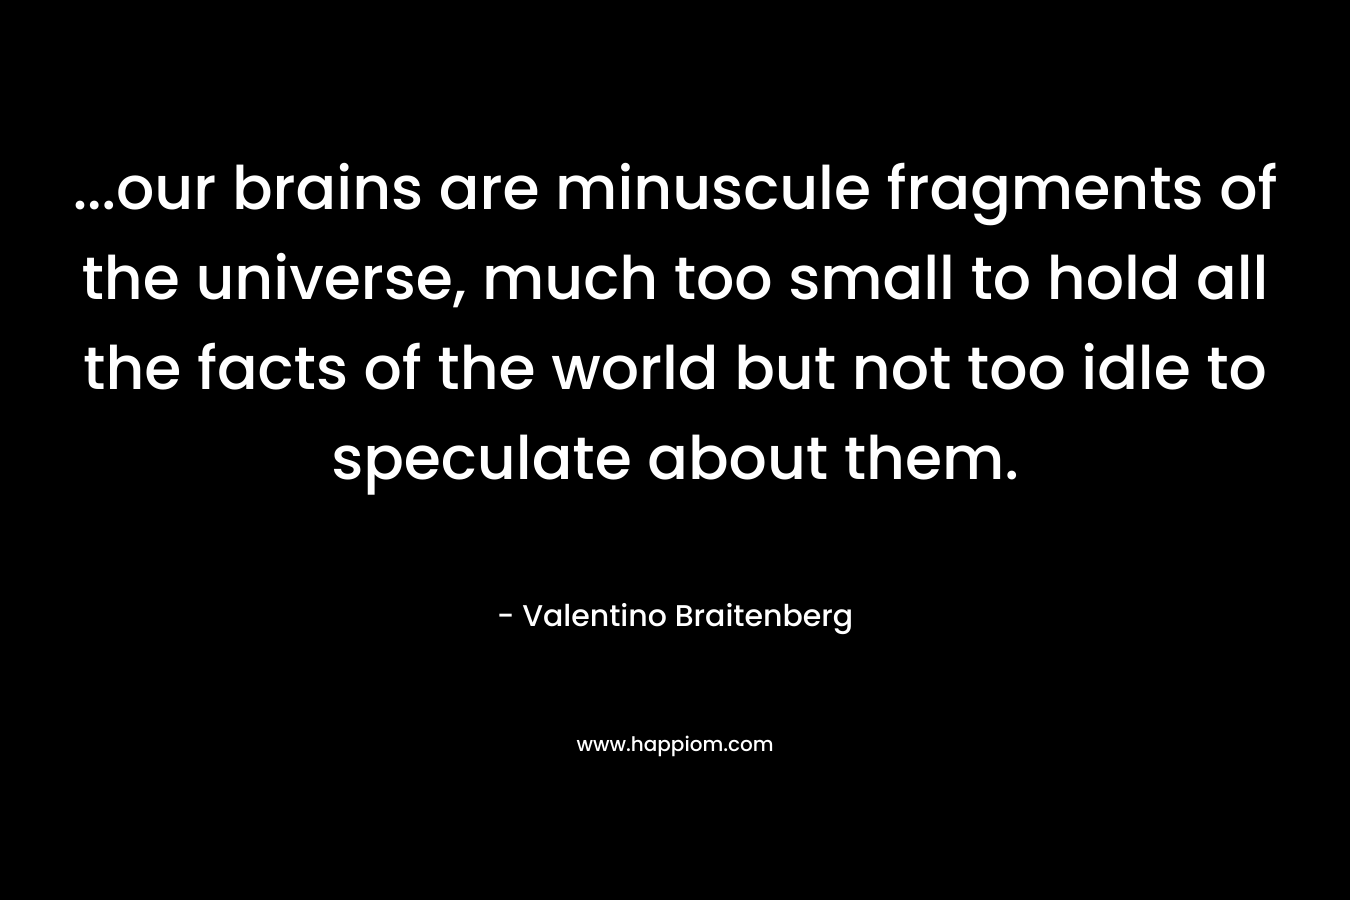 ...our brains are minuscule fragments of the universe, much too small to hold all the facts of the world but not too idle to speculate about them.